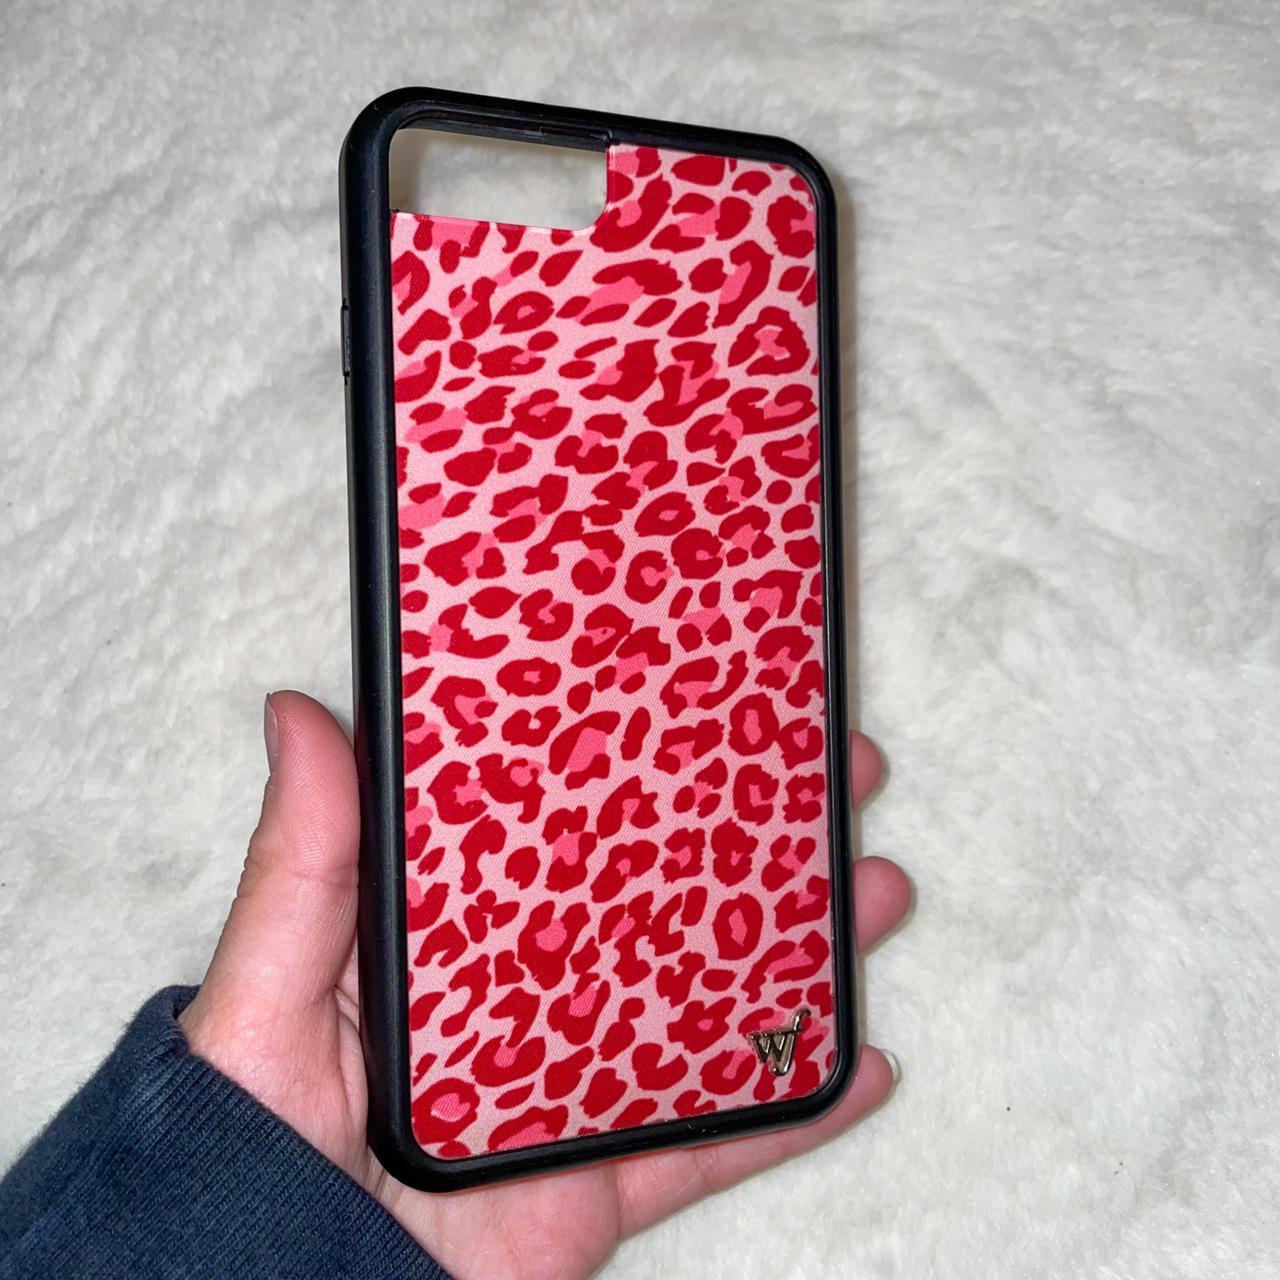 Product Image 1 - Wildflower pink cheetah phone case🌼

Adorable